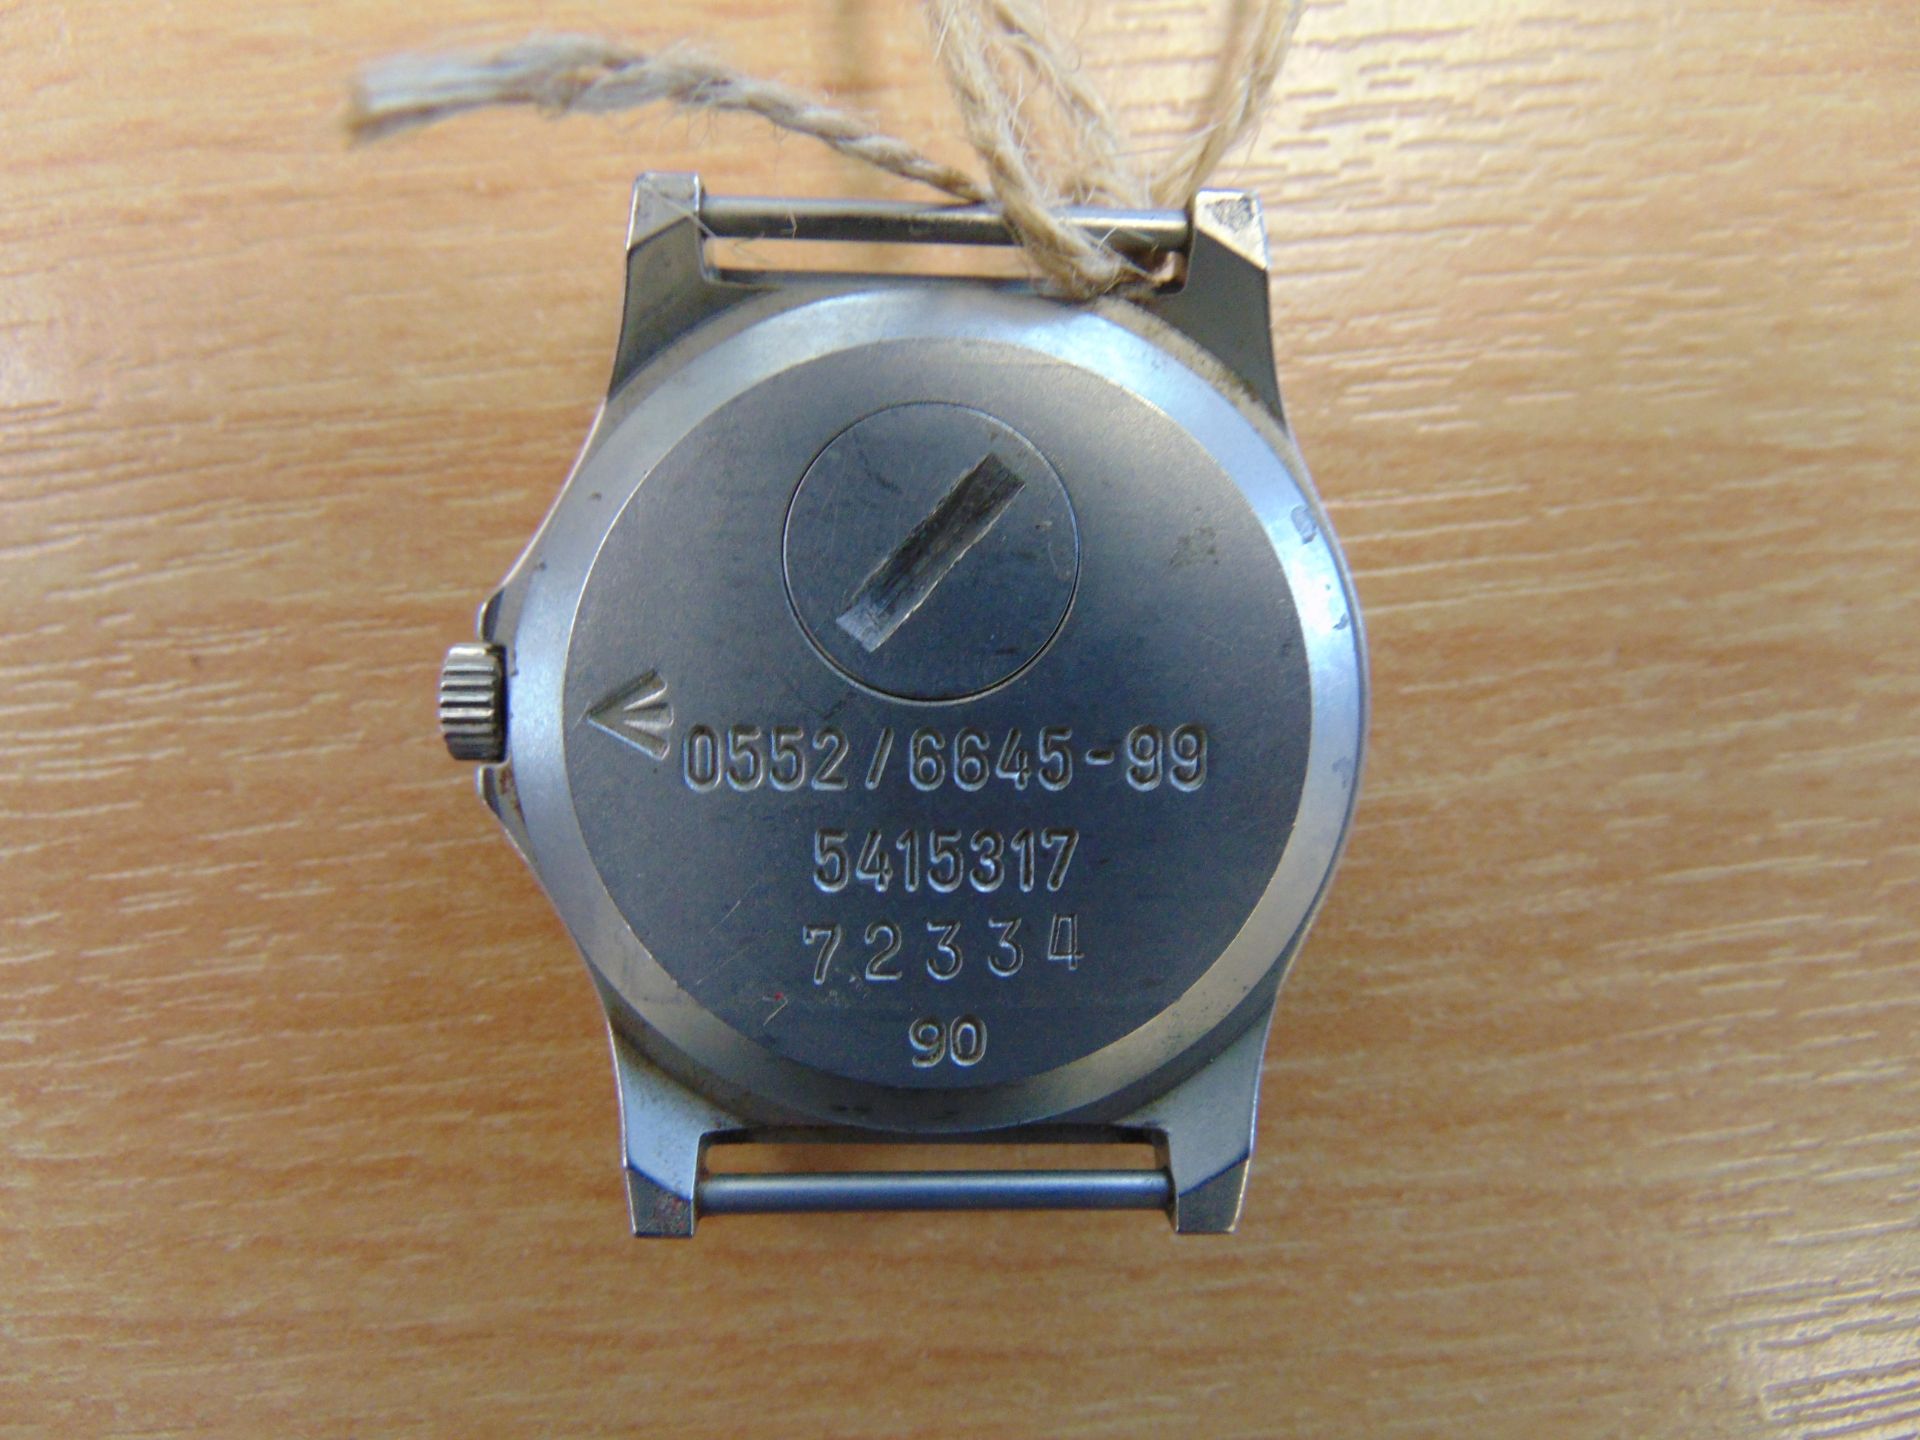 Rare CWC 0552 Royal Marines / Navy Issue Service Watch Nato Marks, Date 1990, * GULF WAR 1 * - Image 3 of 4